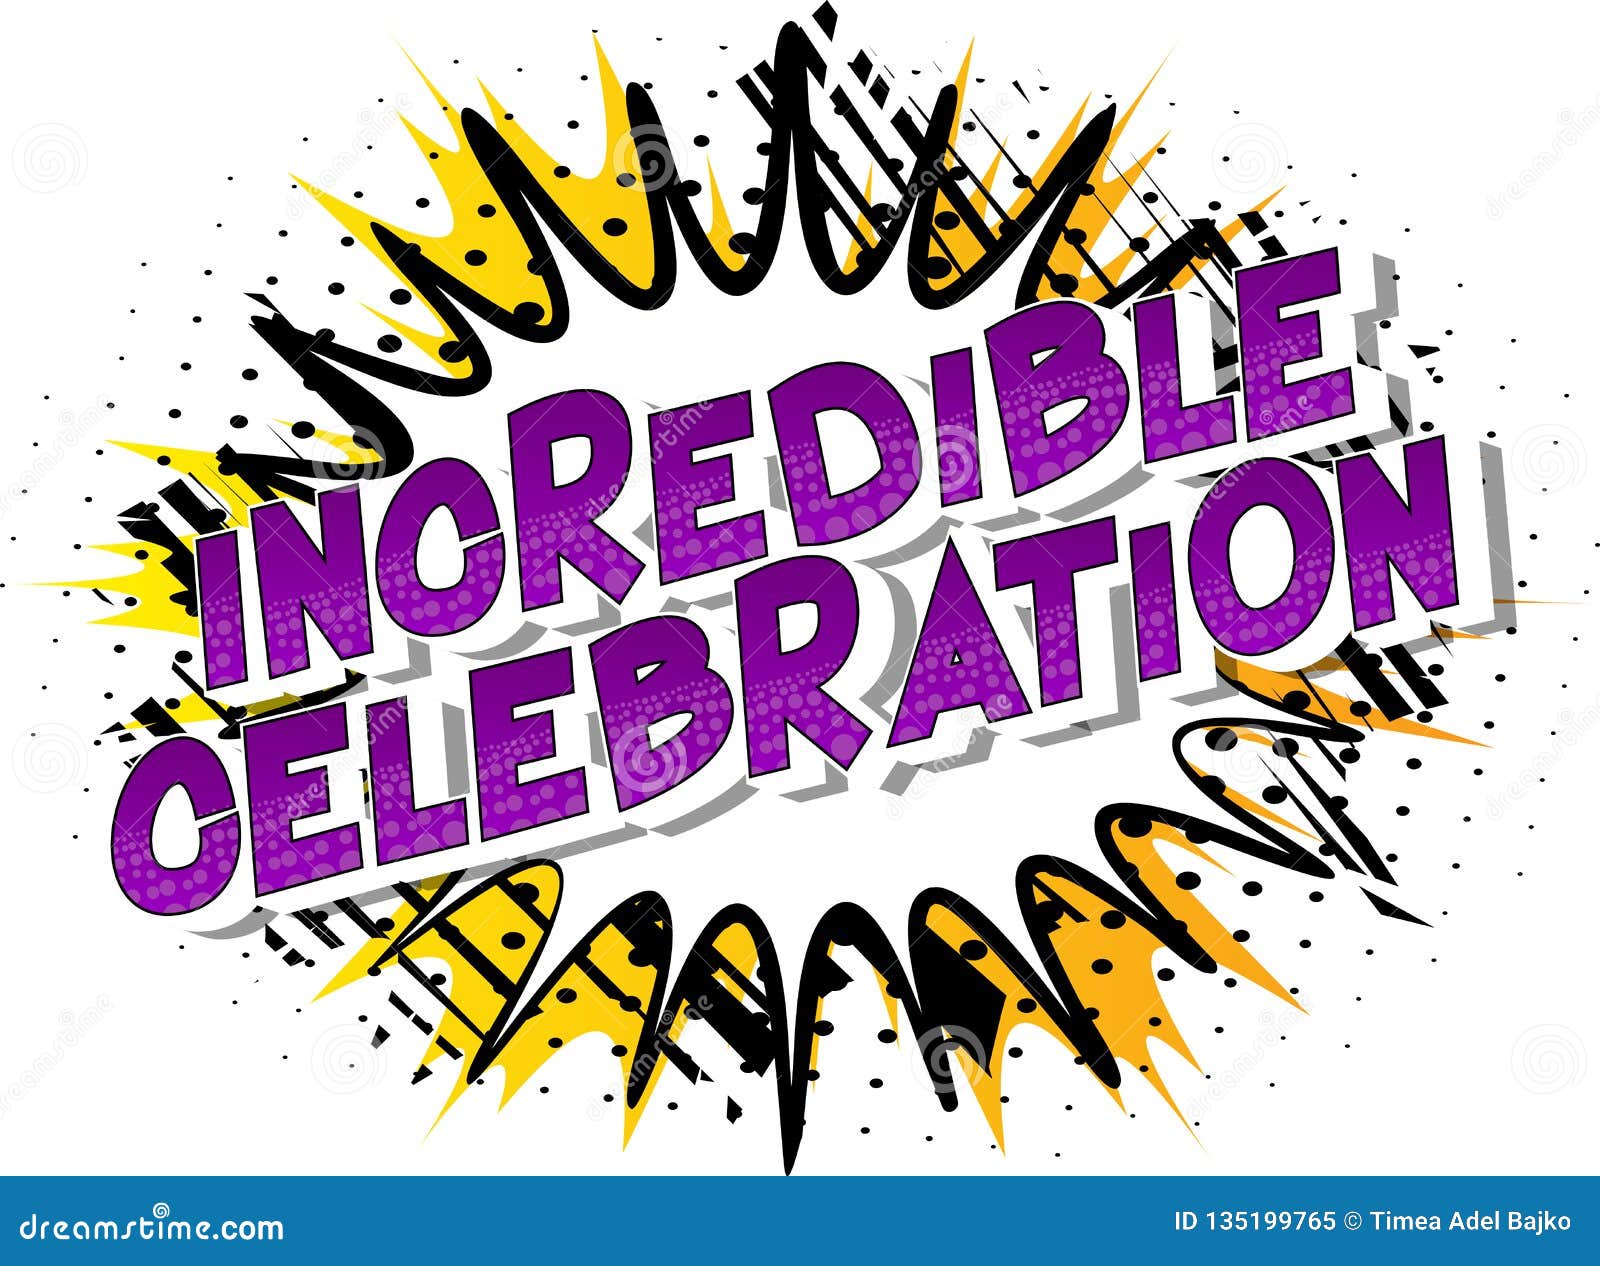 Incredible Celebration Comic Book Style Words Stock Vector